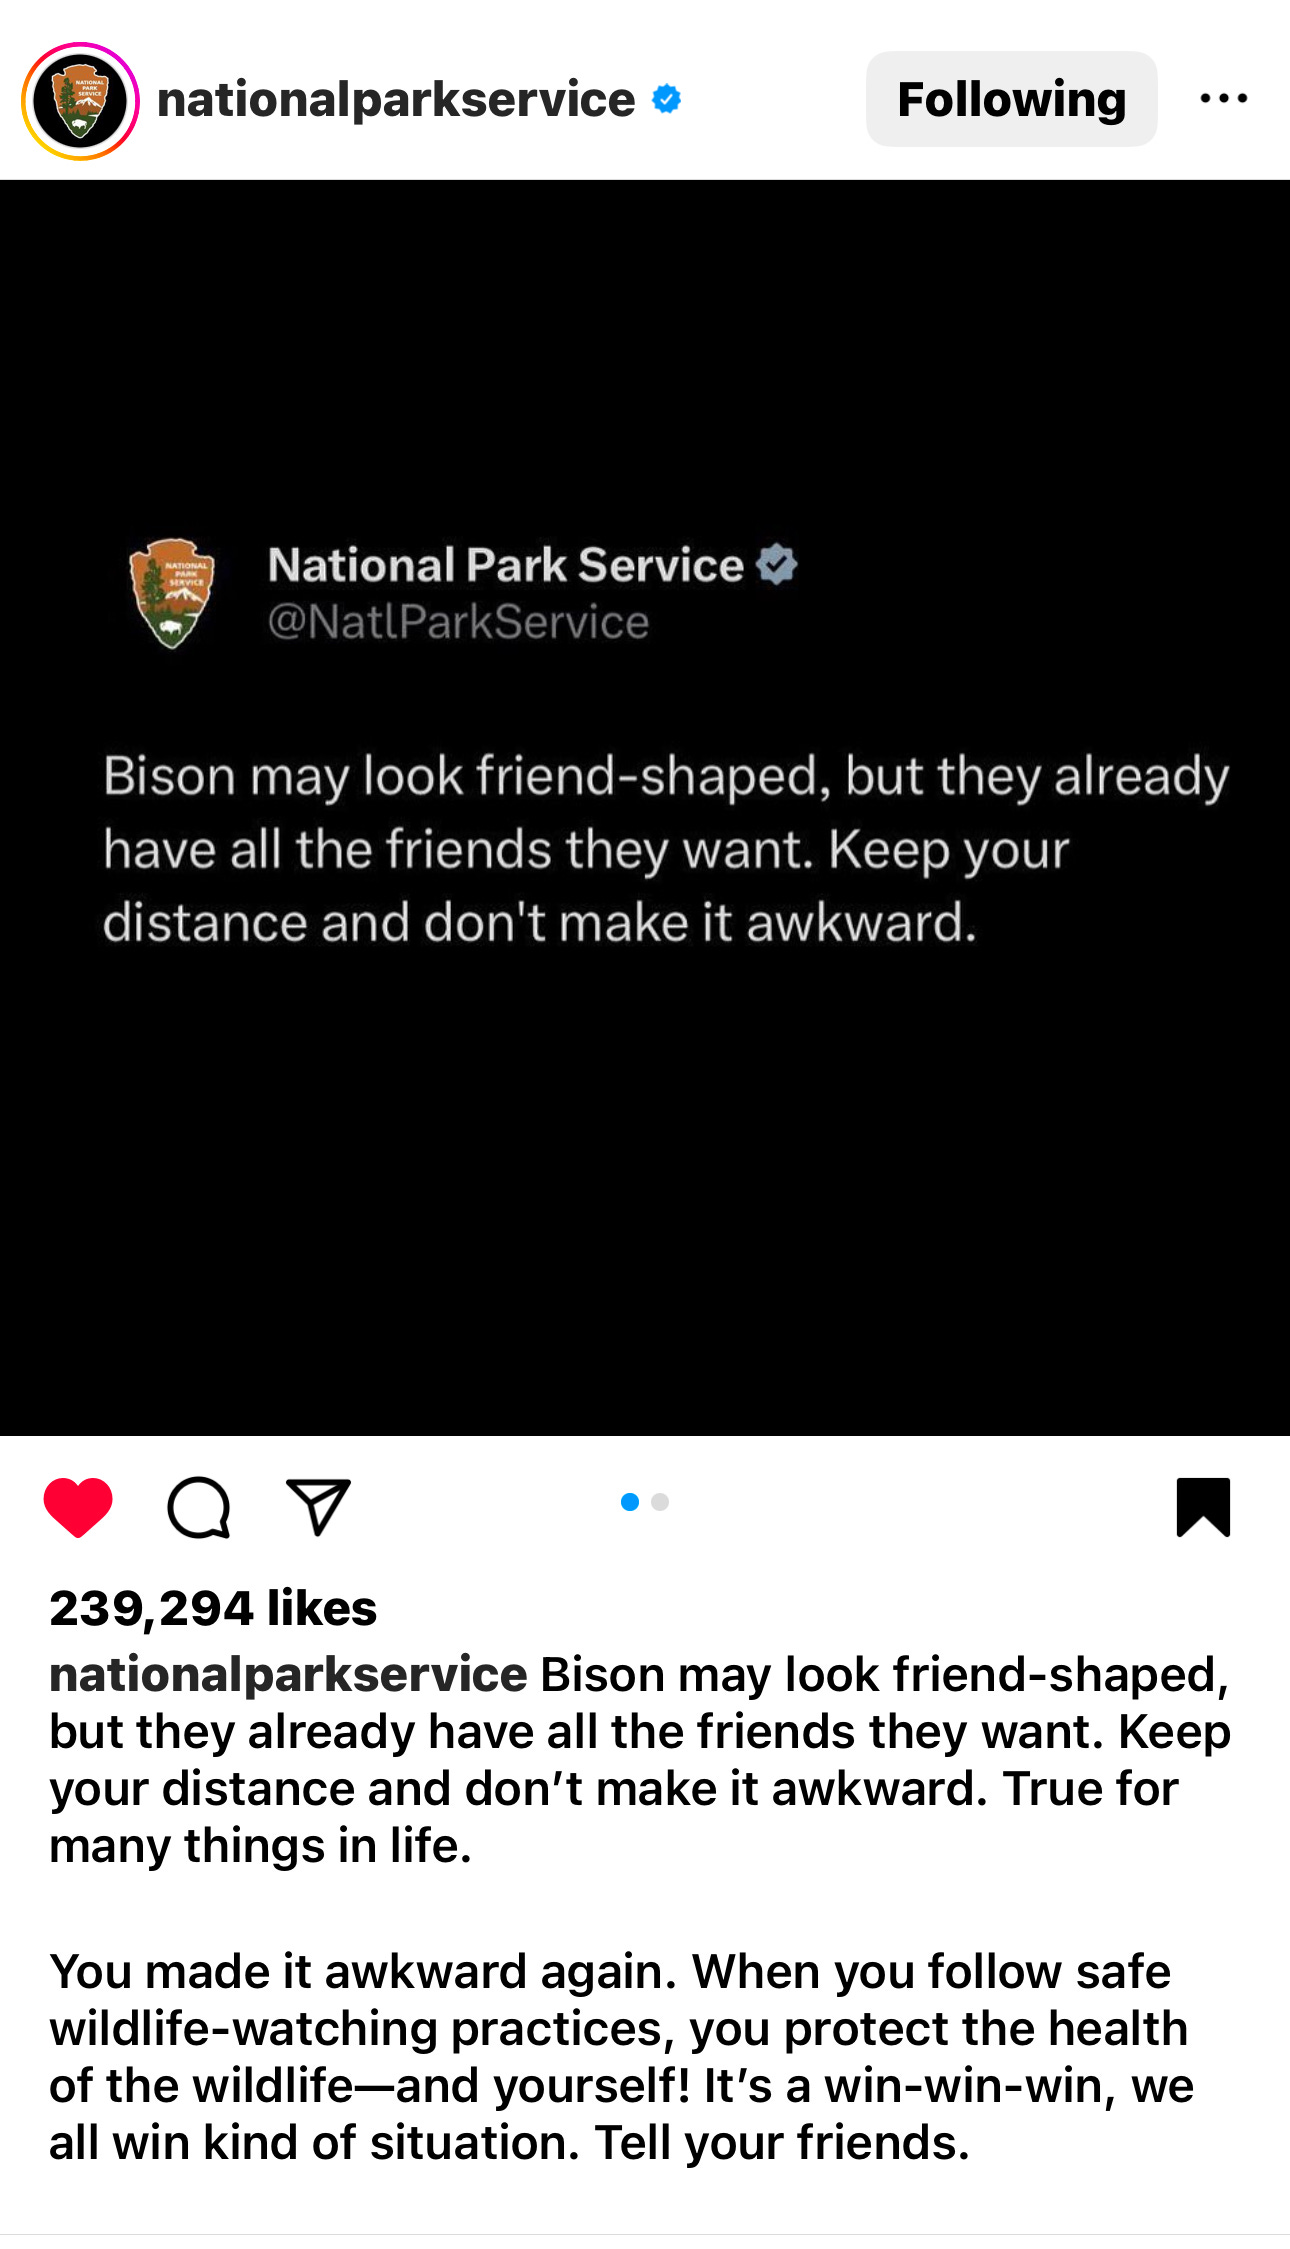 A post by @nationalparkservice on Instagram that reads: Bison may look friend-shaped, but they already have all the friends they want. Keep your distance and don't make it awkward.